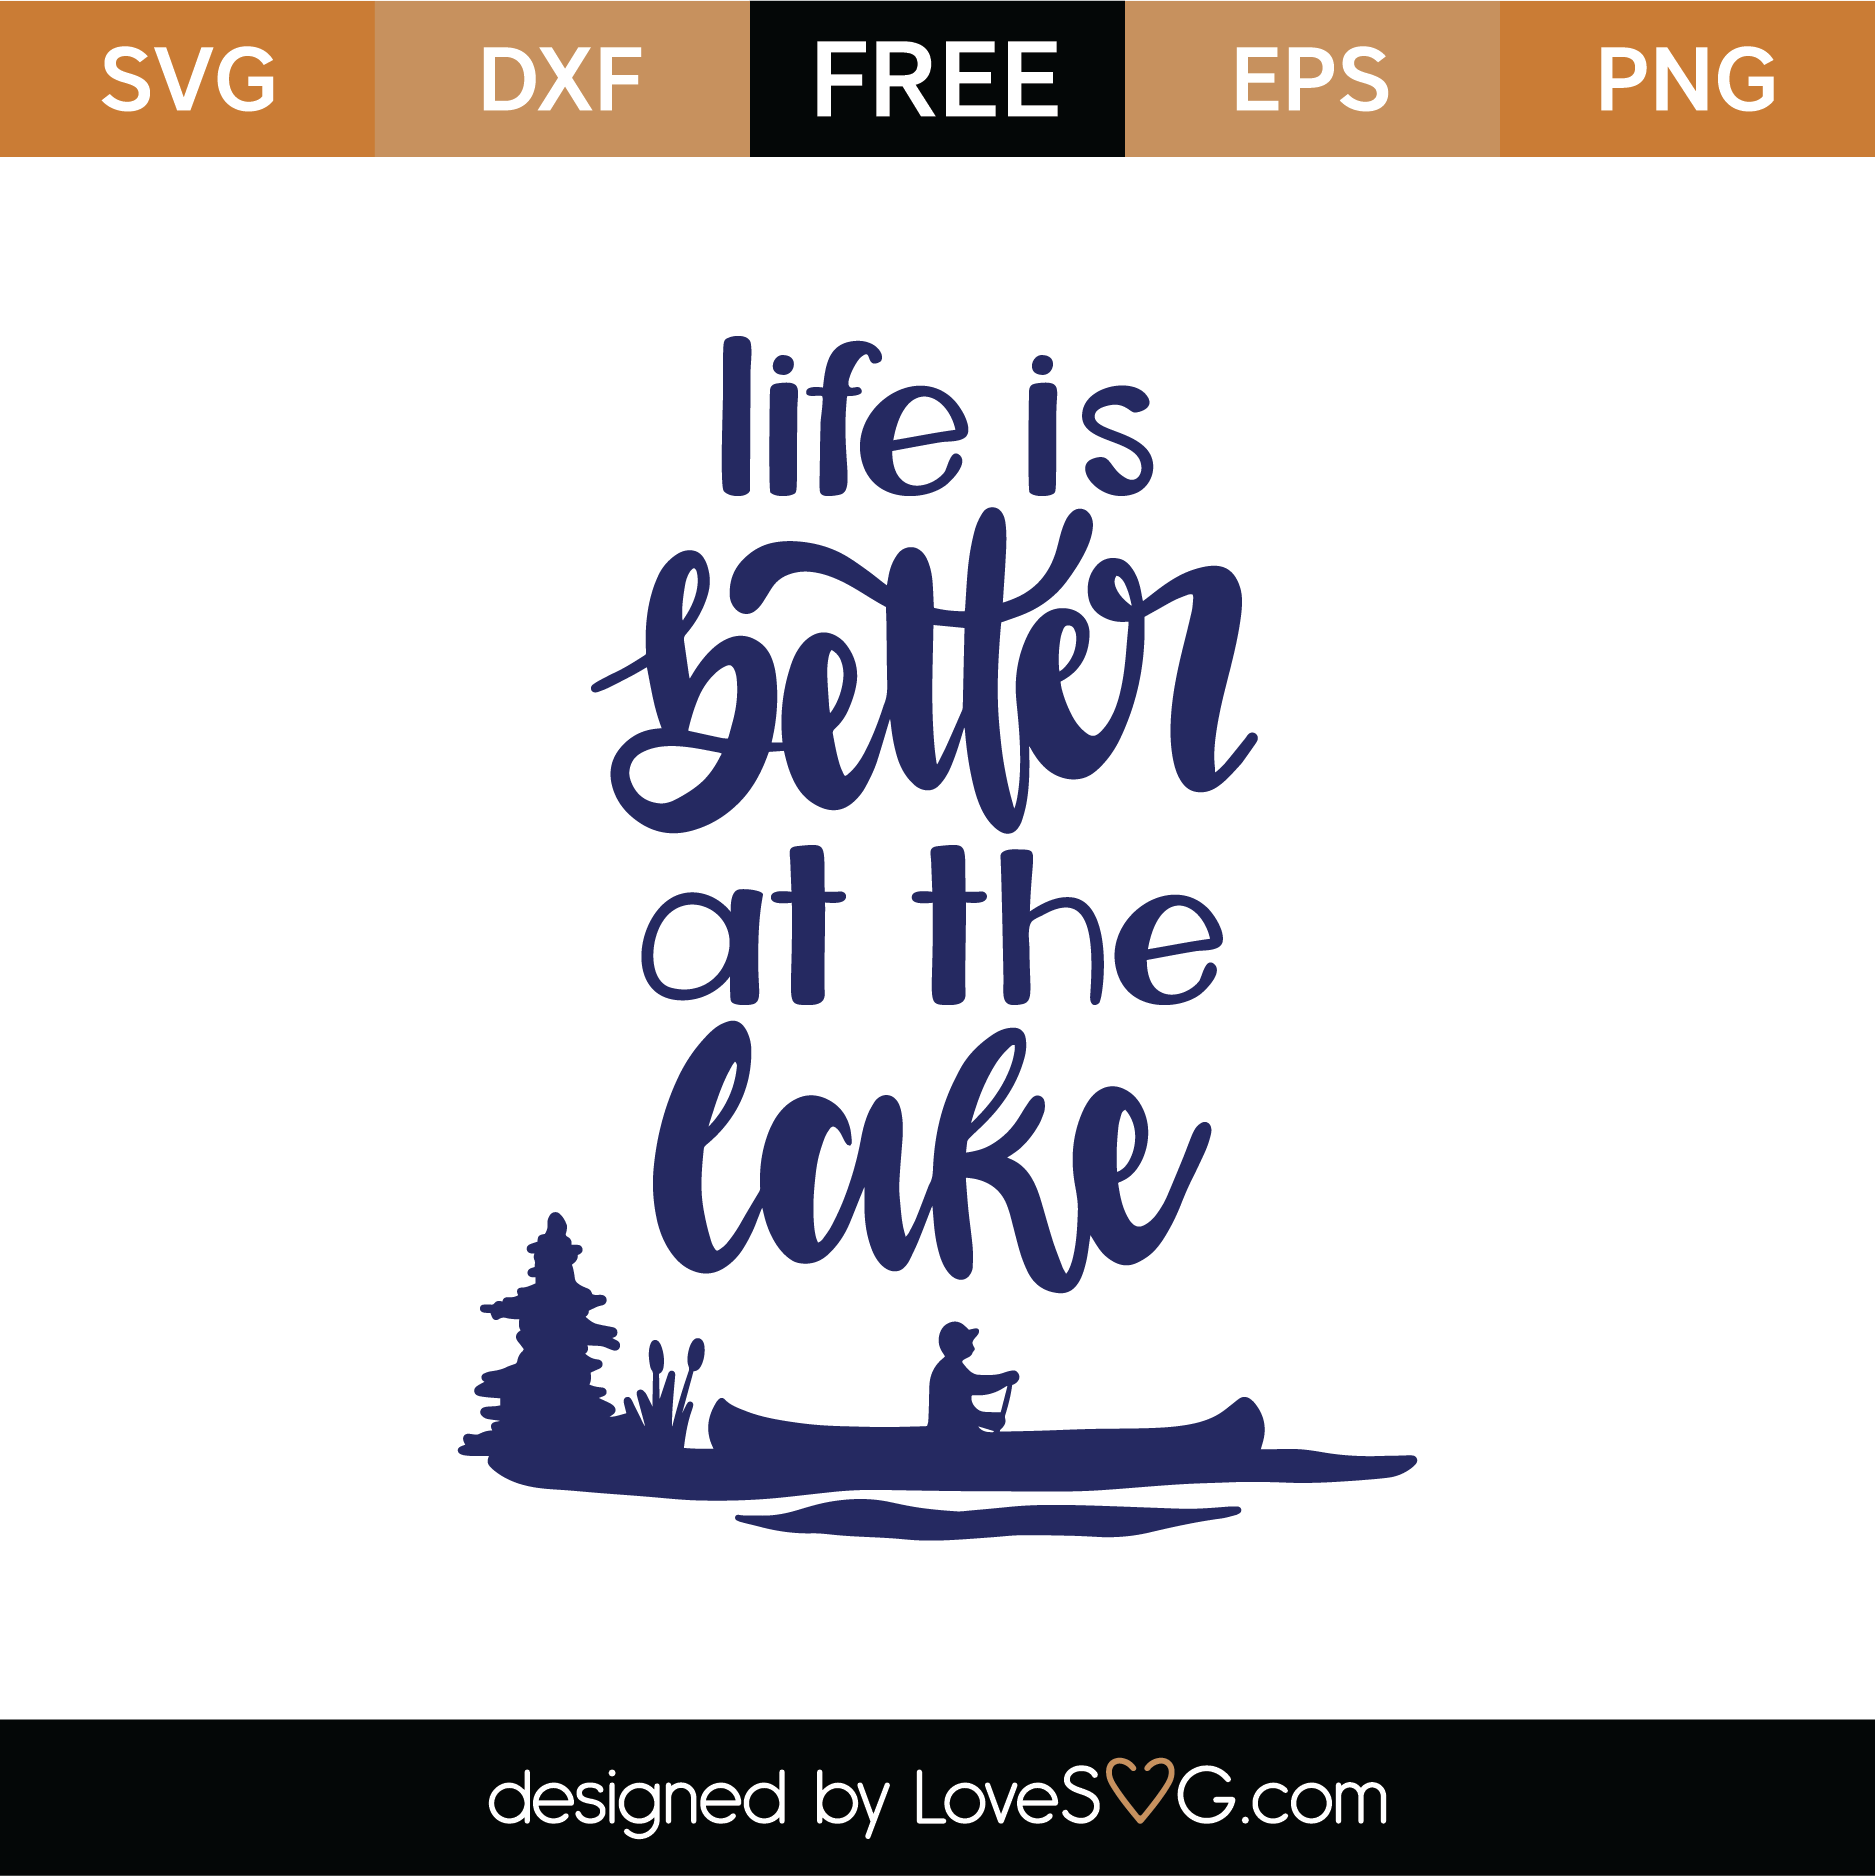 Download Free Life Is Better At The Lake SVG Cut File | Lovesvg.com